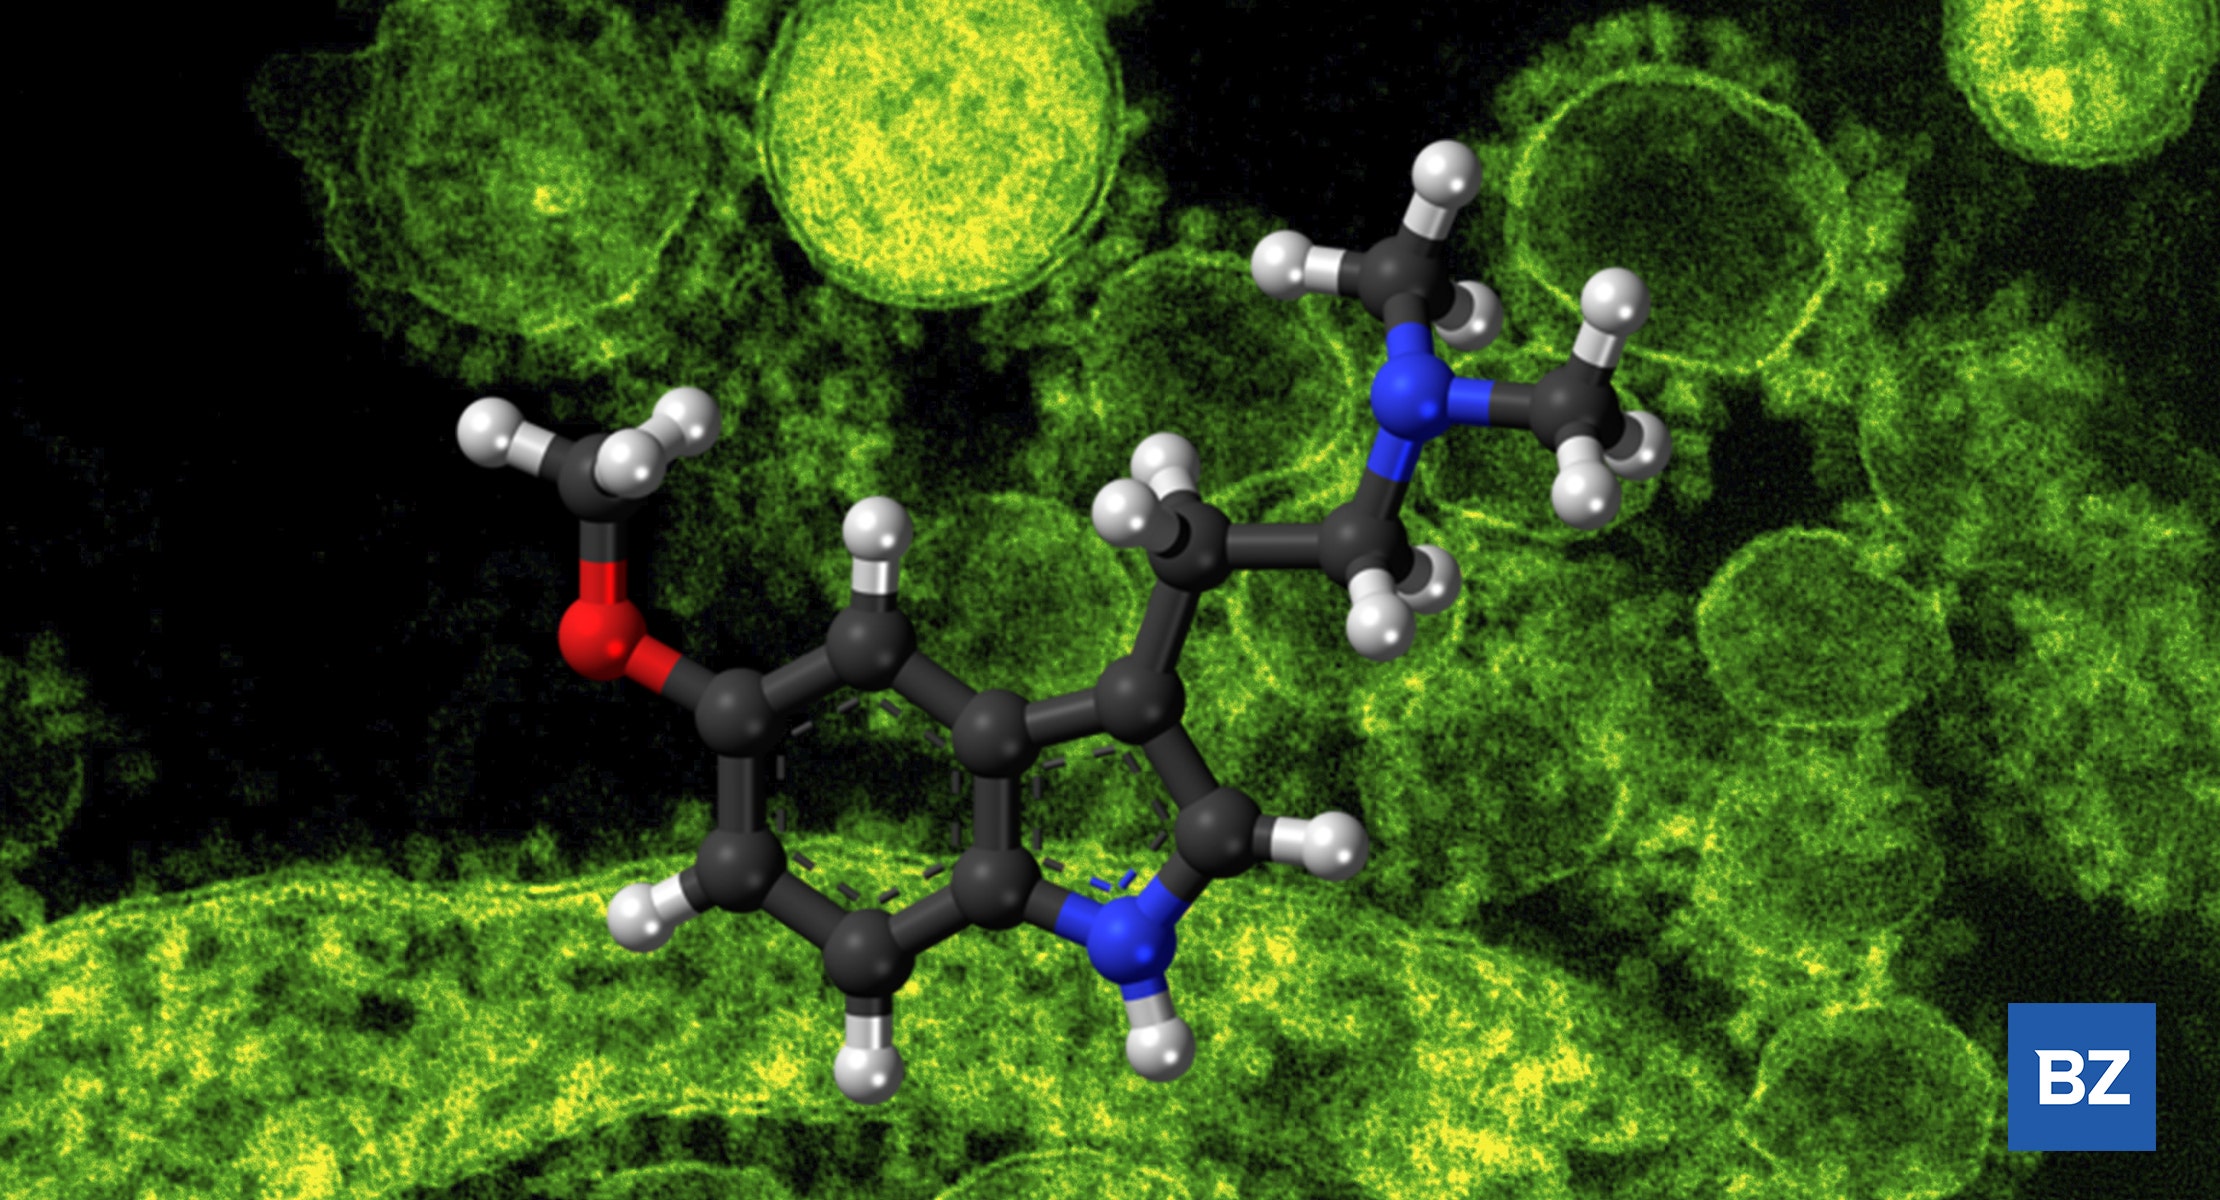 Race Is On For Psychedelic DMT-Related Compounds, Small Pharma, Inc To Issue Two New Patents